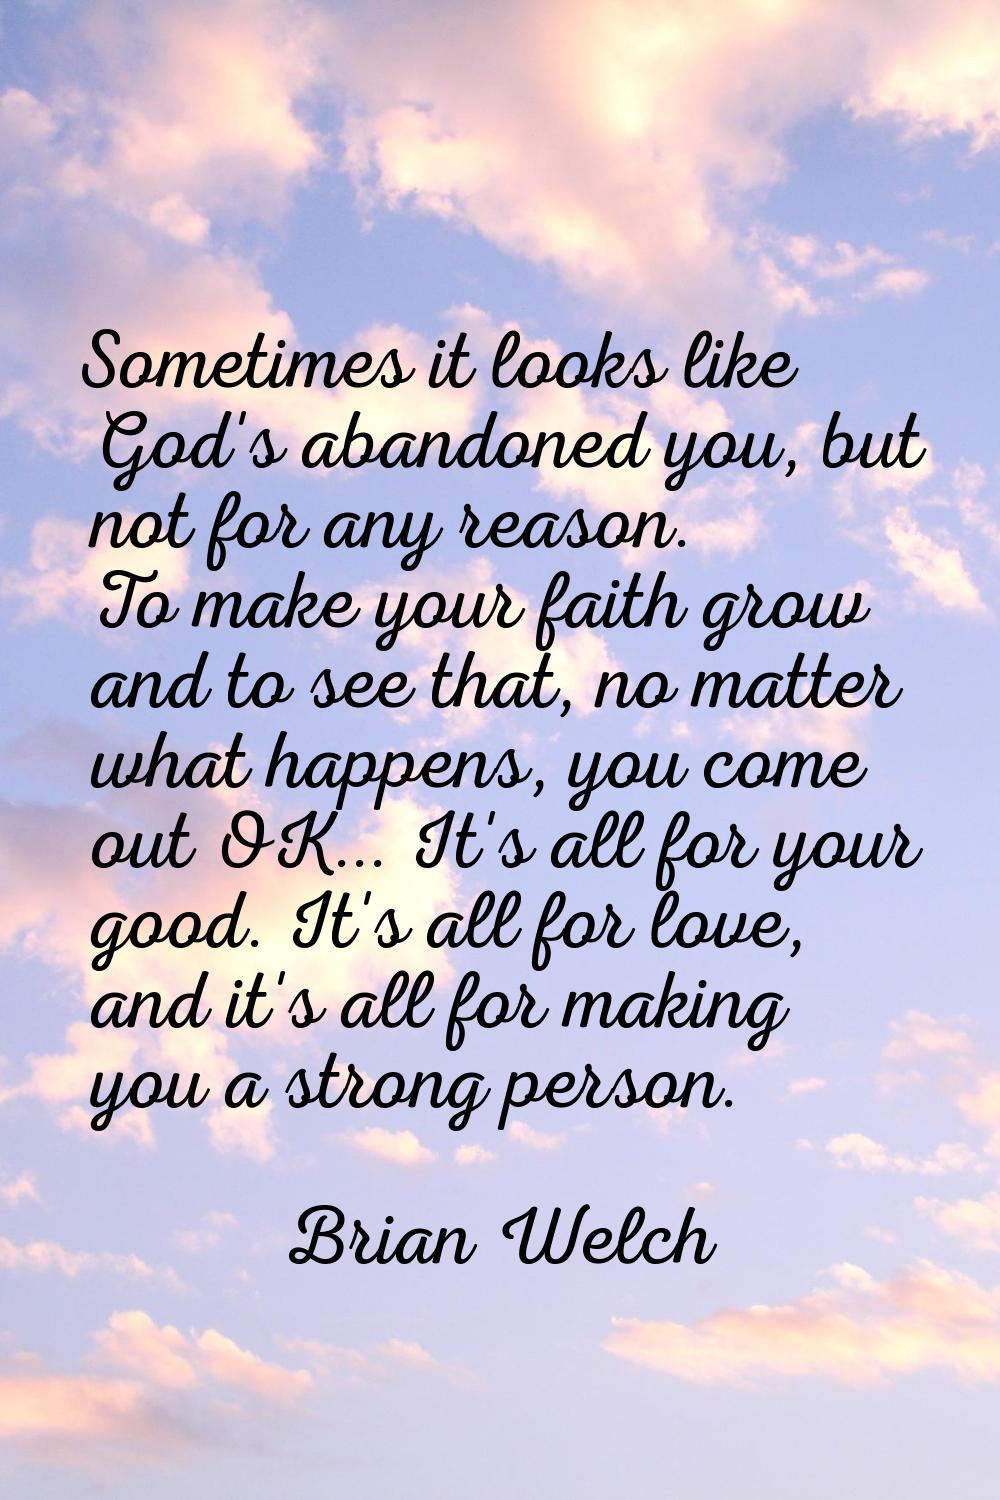 Sometimes it looks like God's abandoned you, but not for any reason. To make your faith grow and to